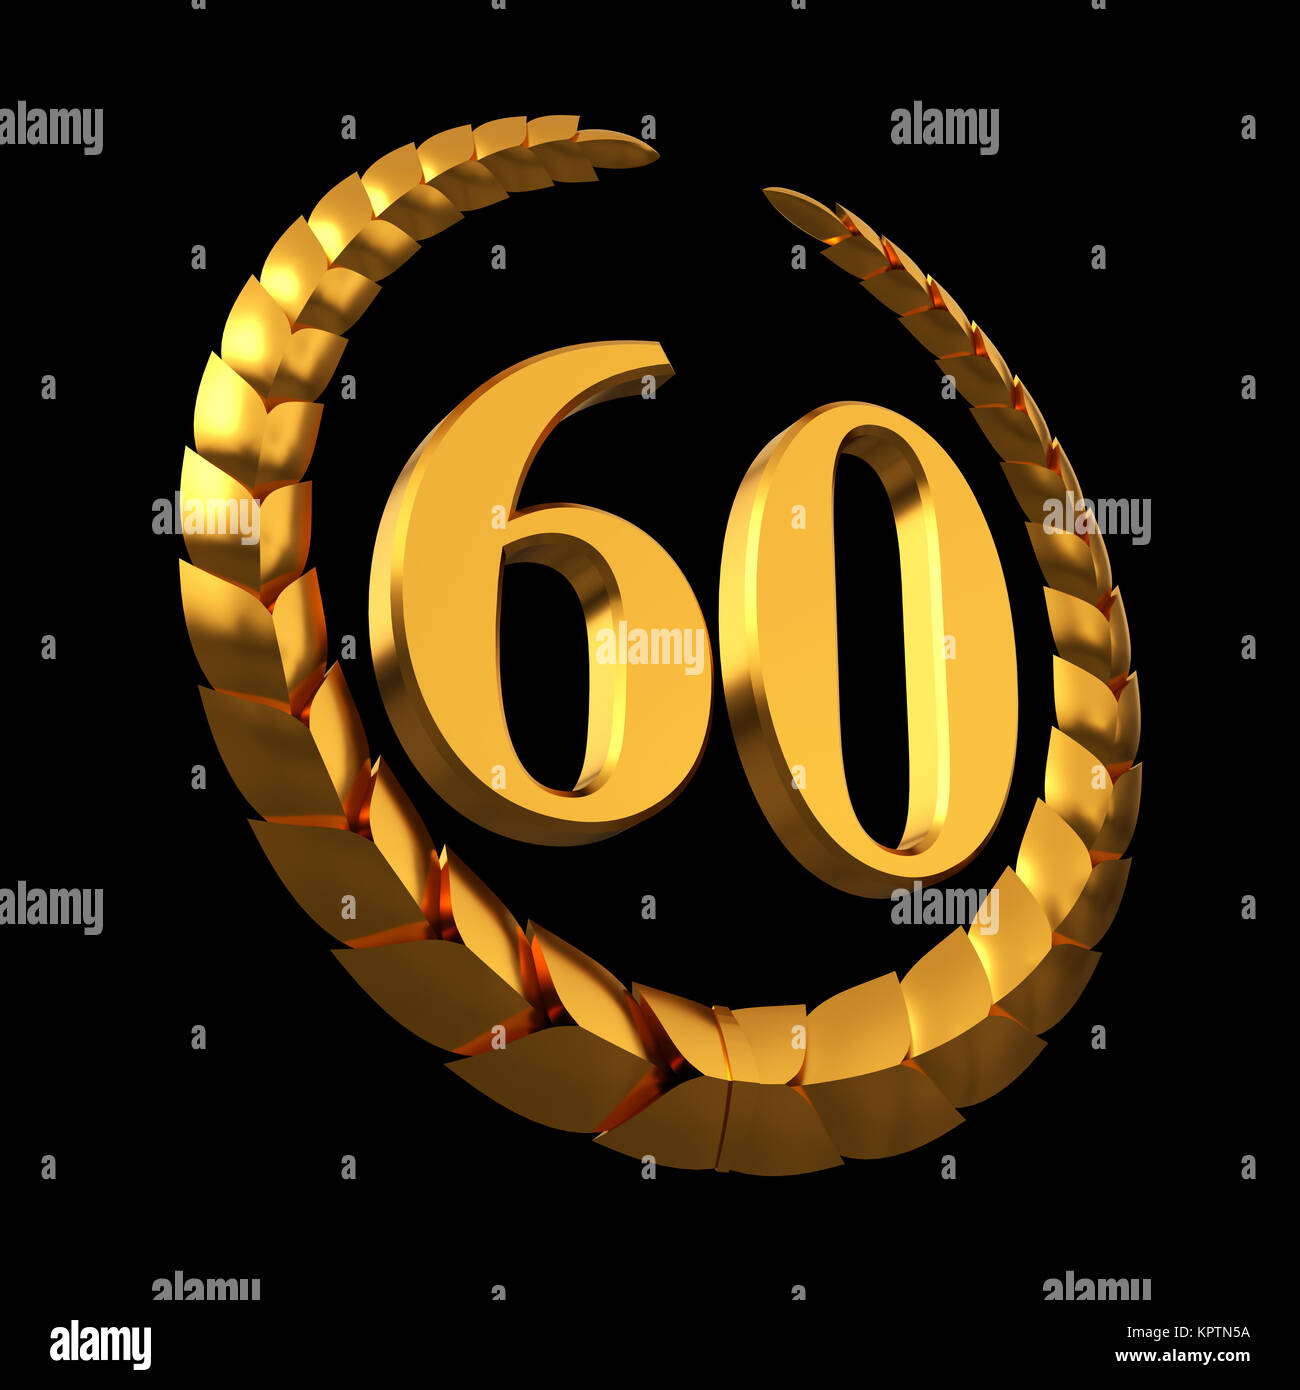 Anniversary Golden Laurel Wreath And Numeral 60 On Black Background Stock Photo